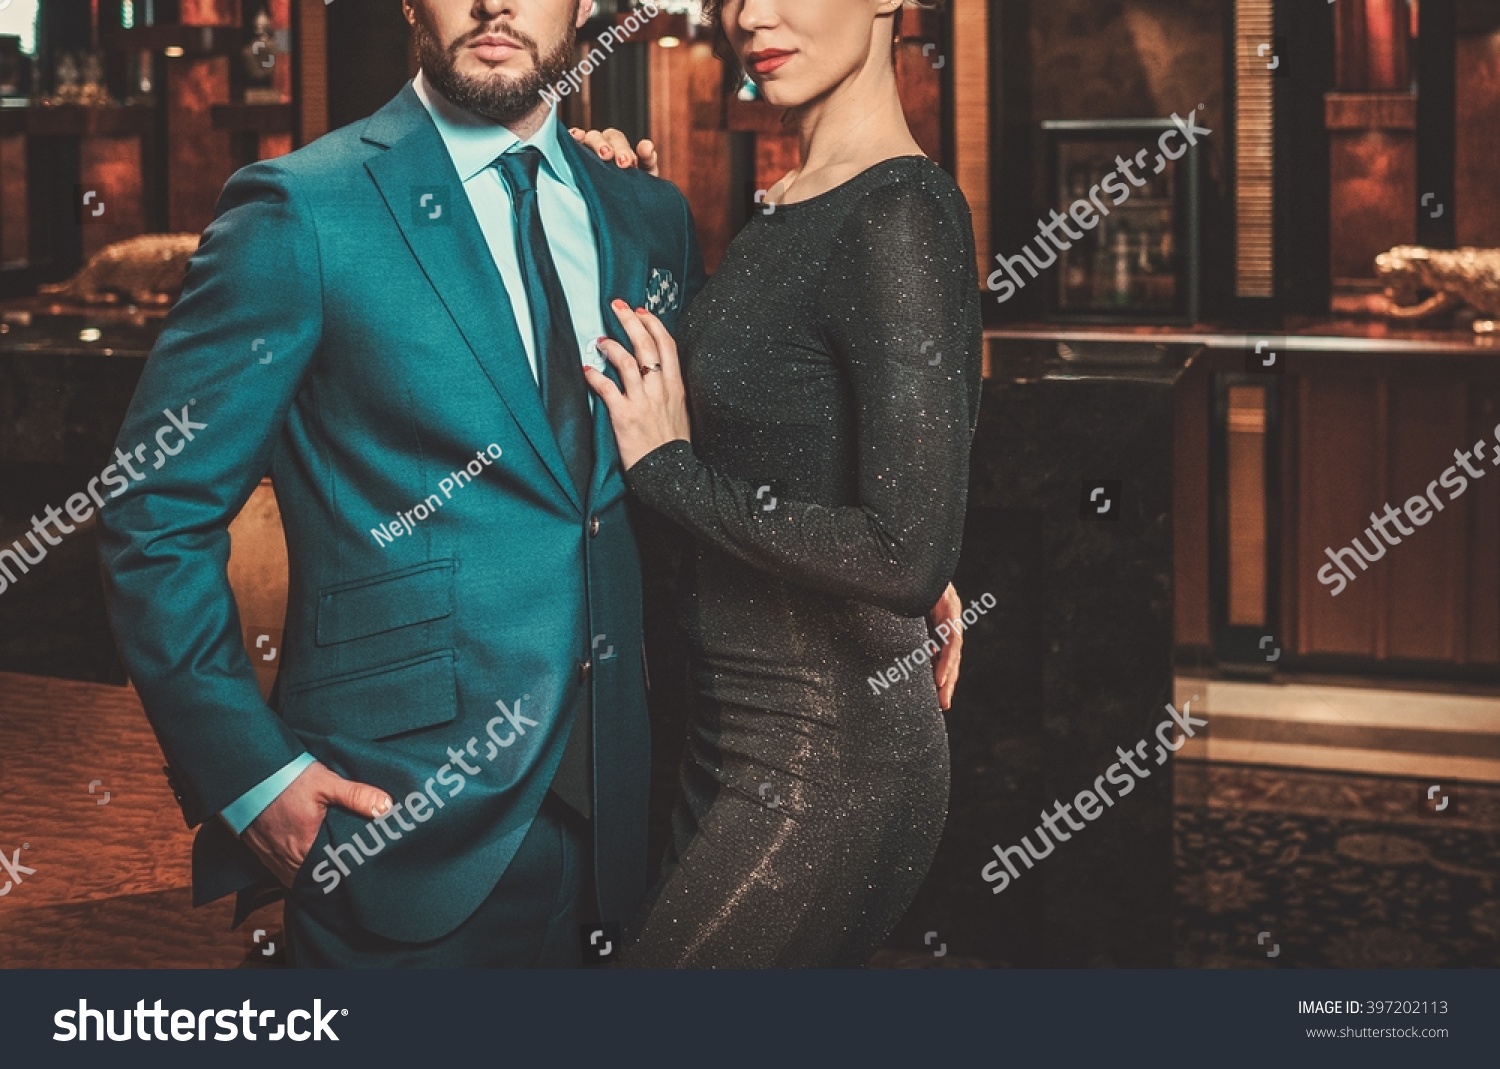 Well-dressed couple in luxury apartment interior. #397202113